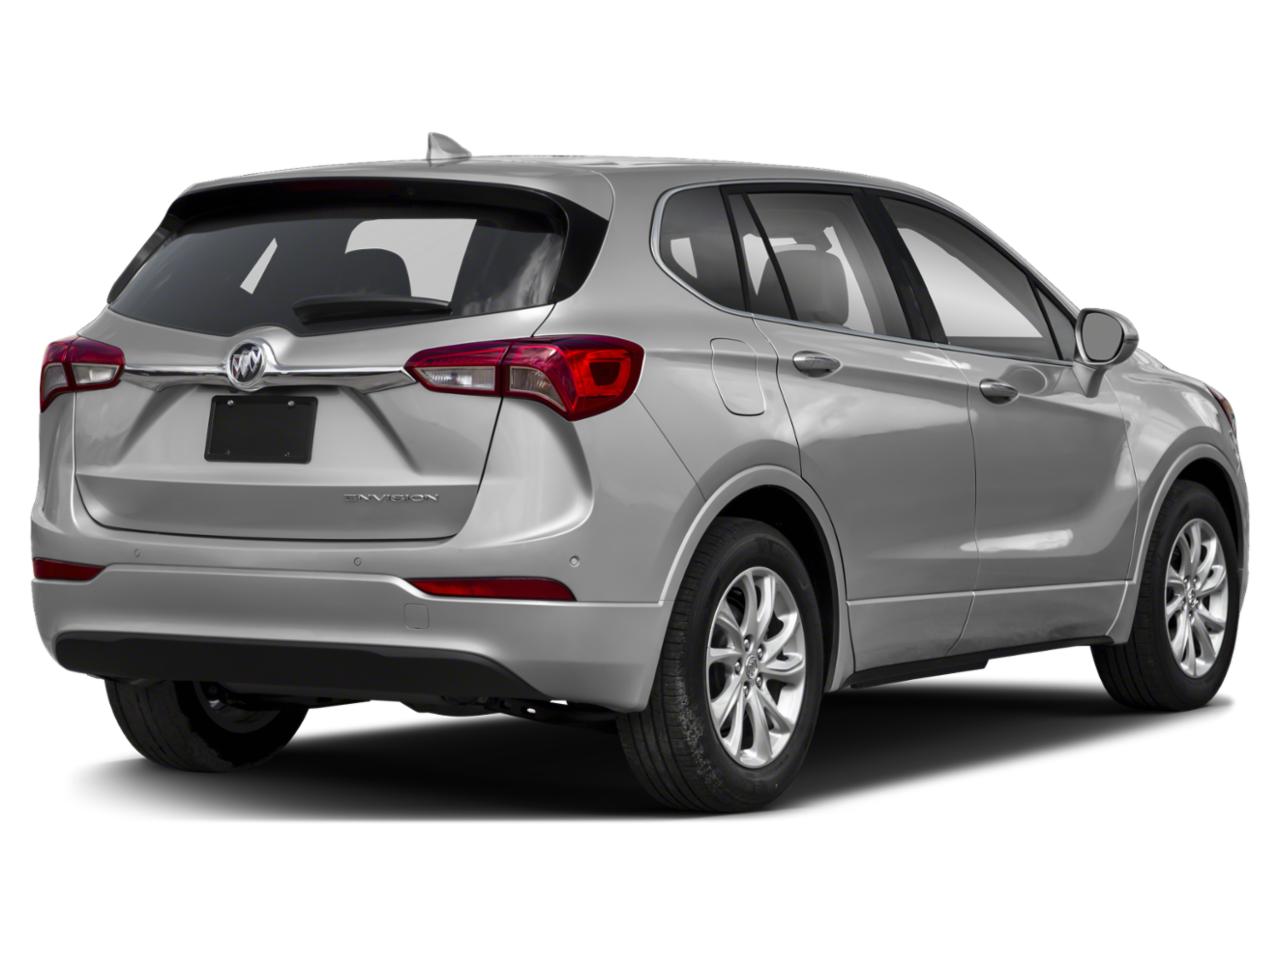 2020 Buick Envision Vehicle Photo in ELYRIA, OH 44035-6349